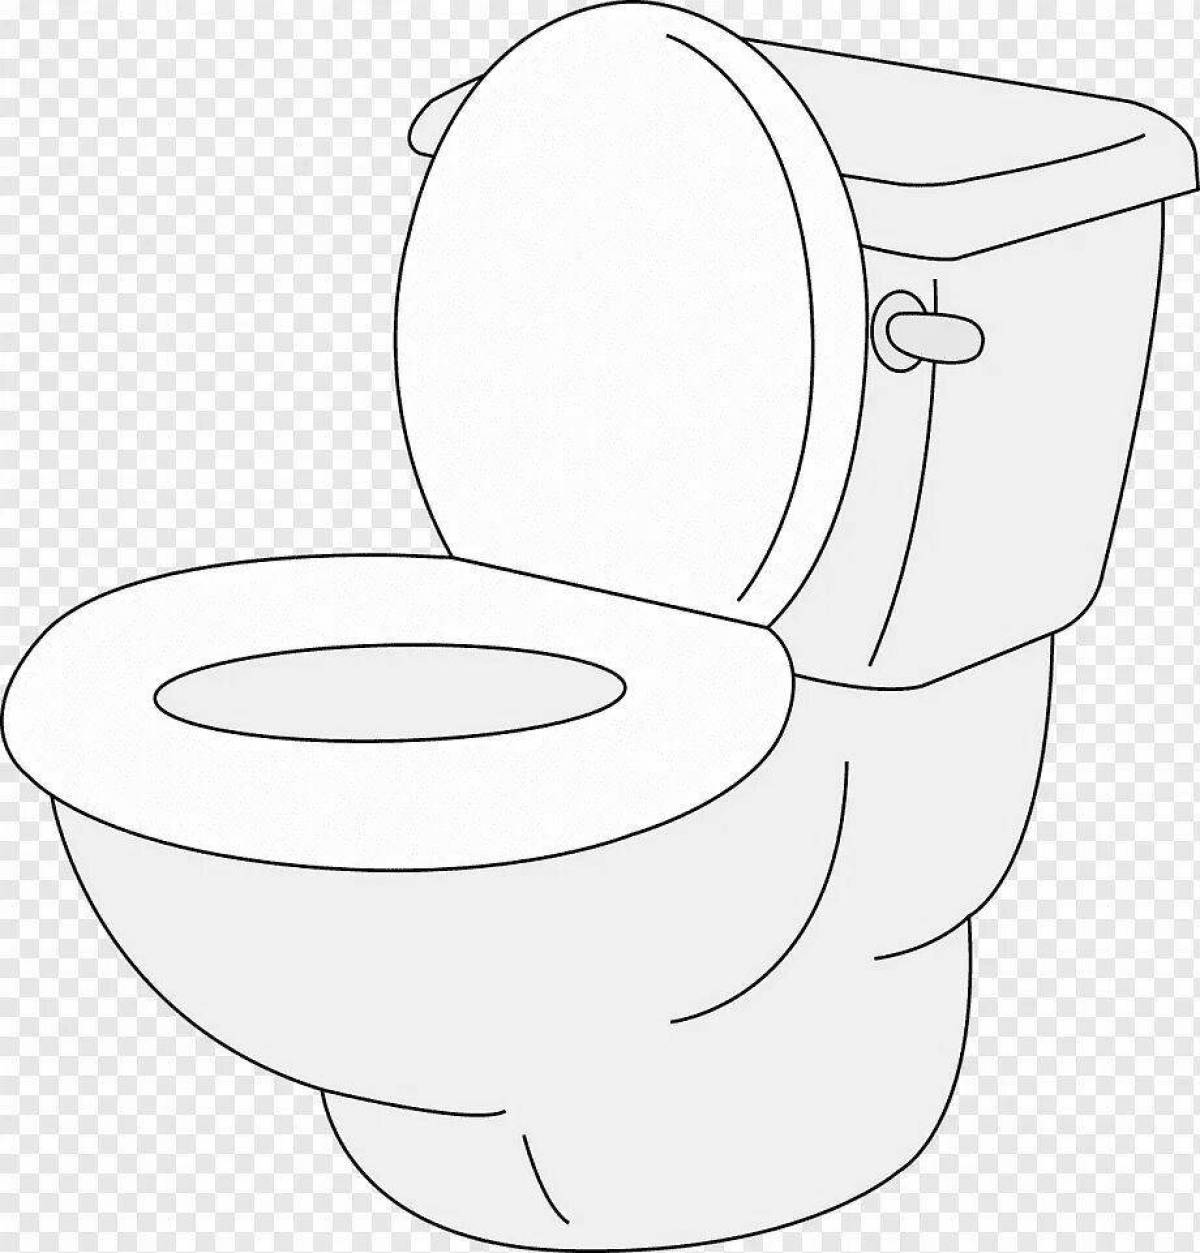 Uplifting toilet coloring page for youth